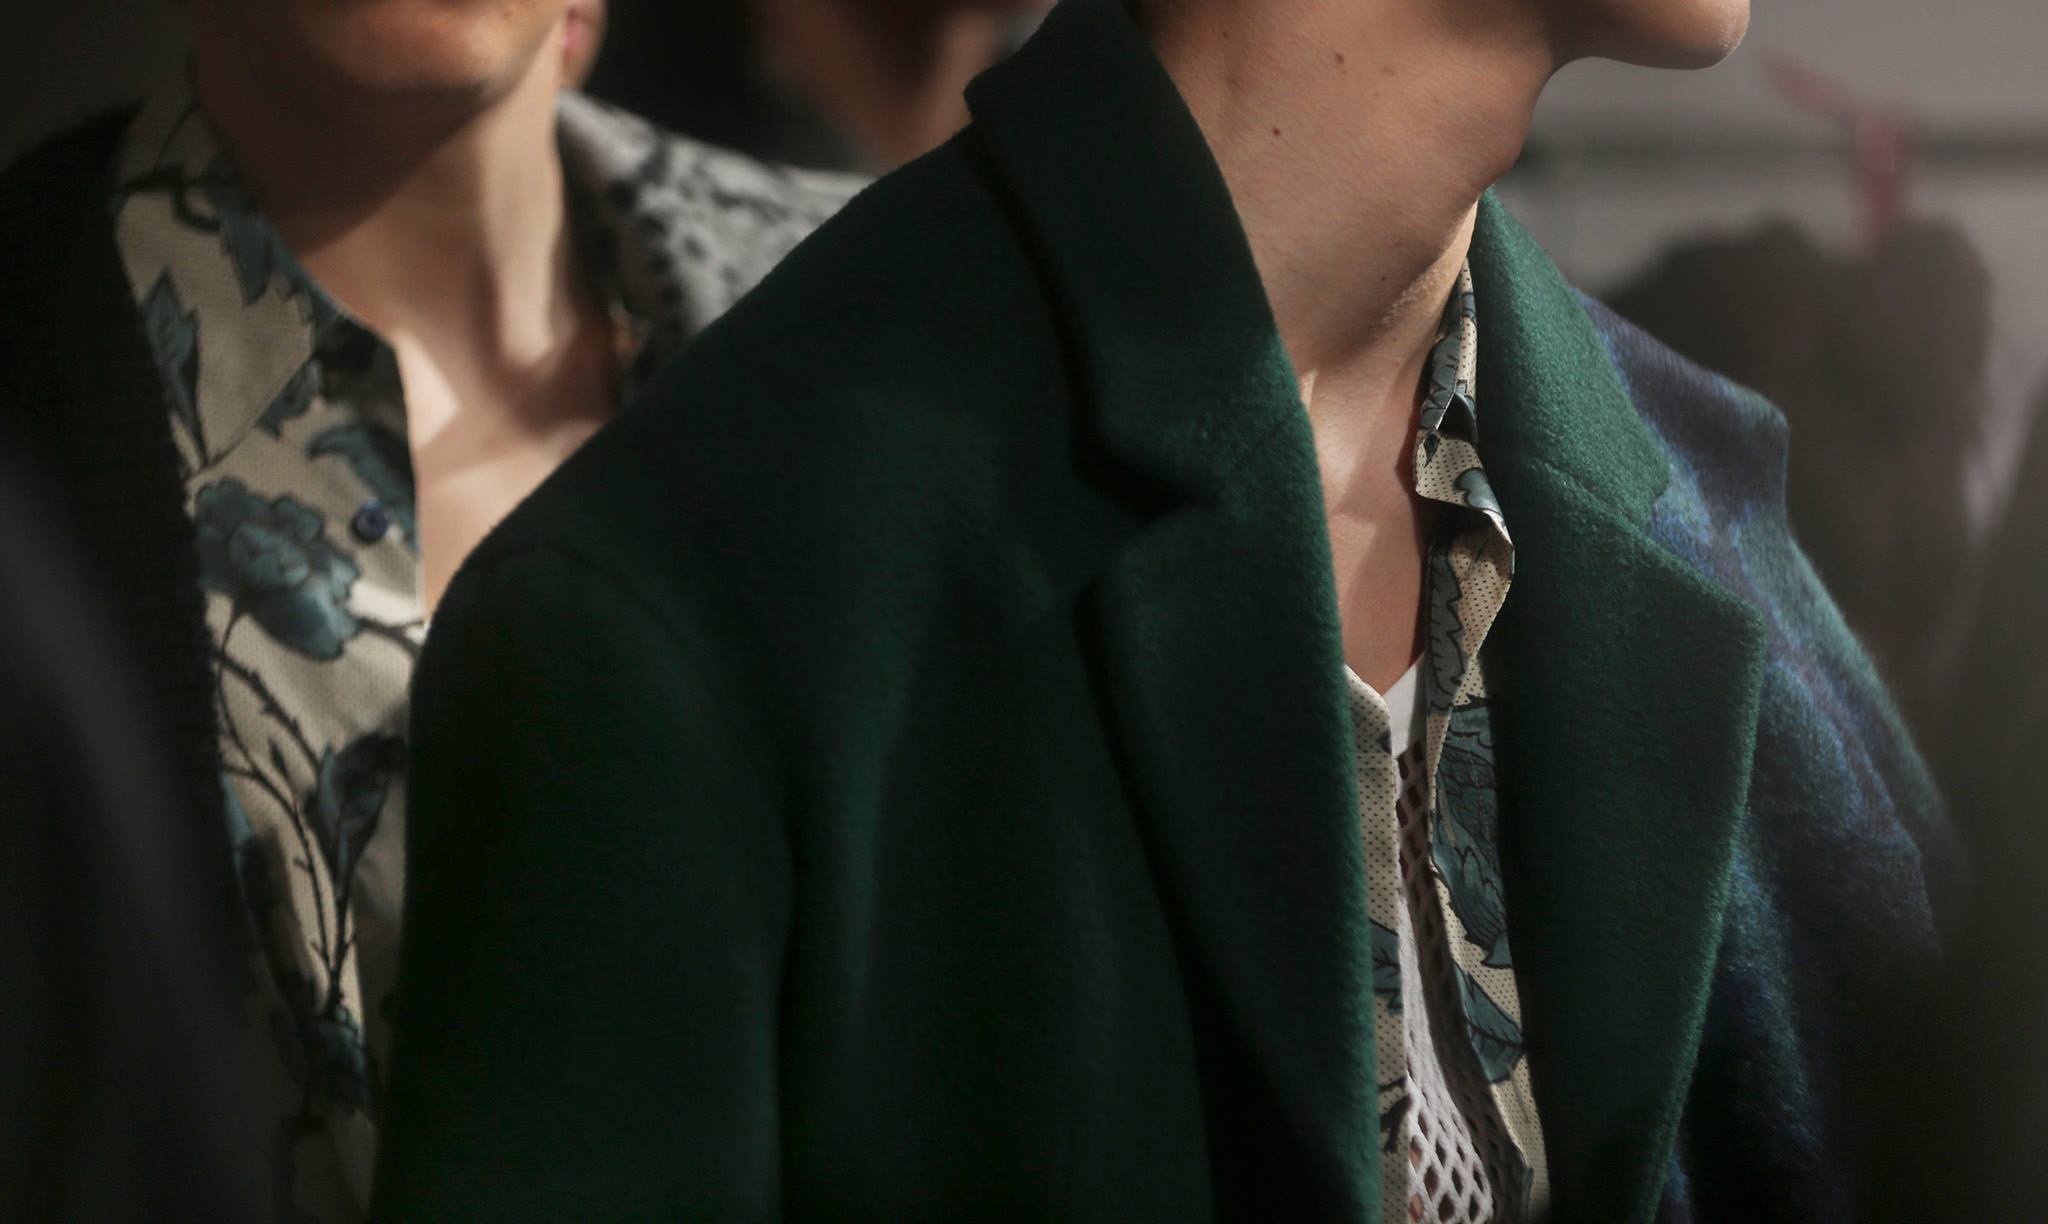 Backstage at the The Burberry Prorsum Menswear Fall Winter 2014 Show 6